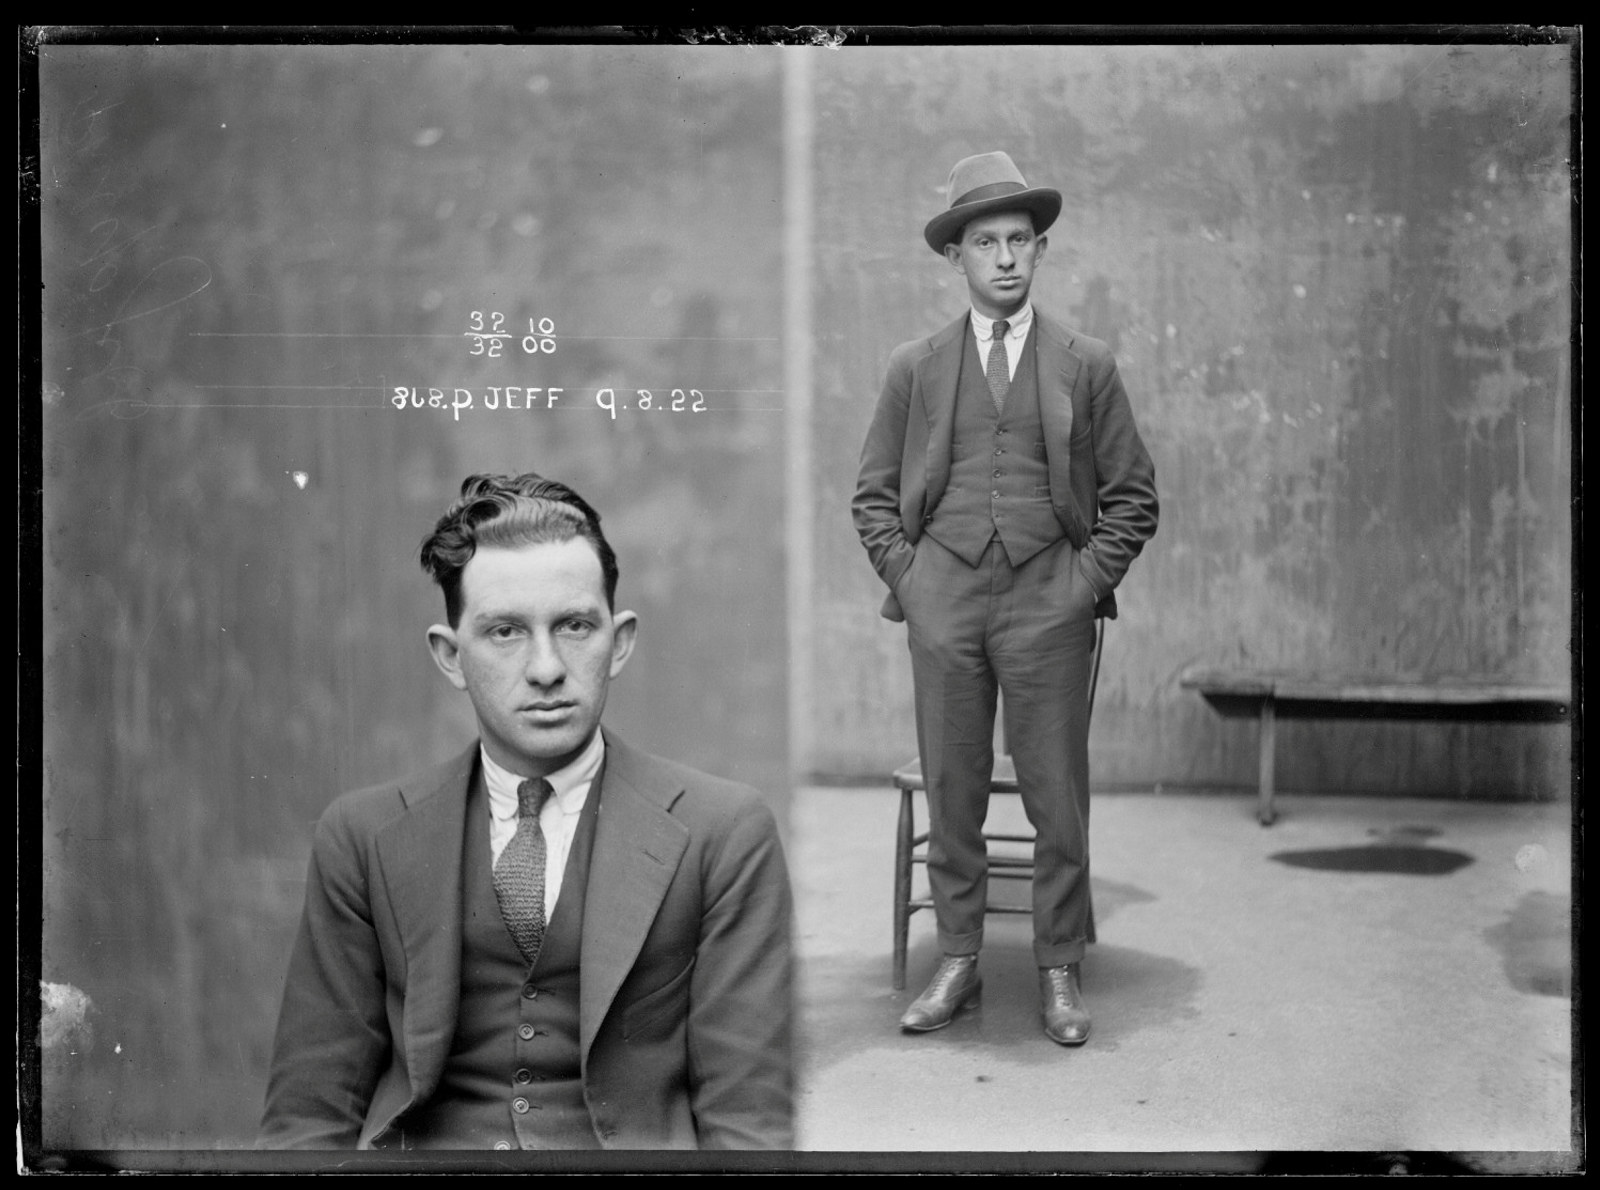 Phil Jeffs, Special Photograph number 868, 9 August 1922, Central Police Station, Sydney